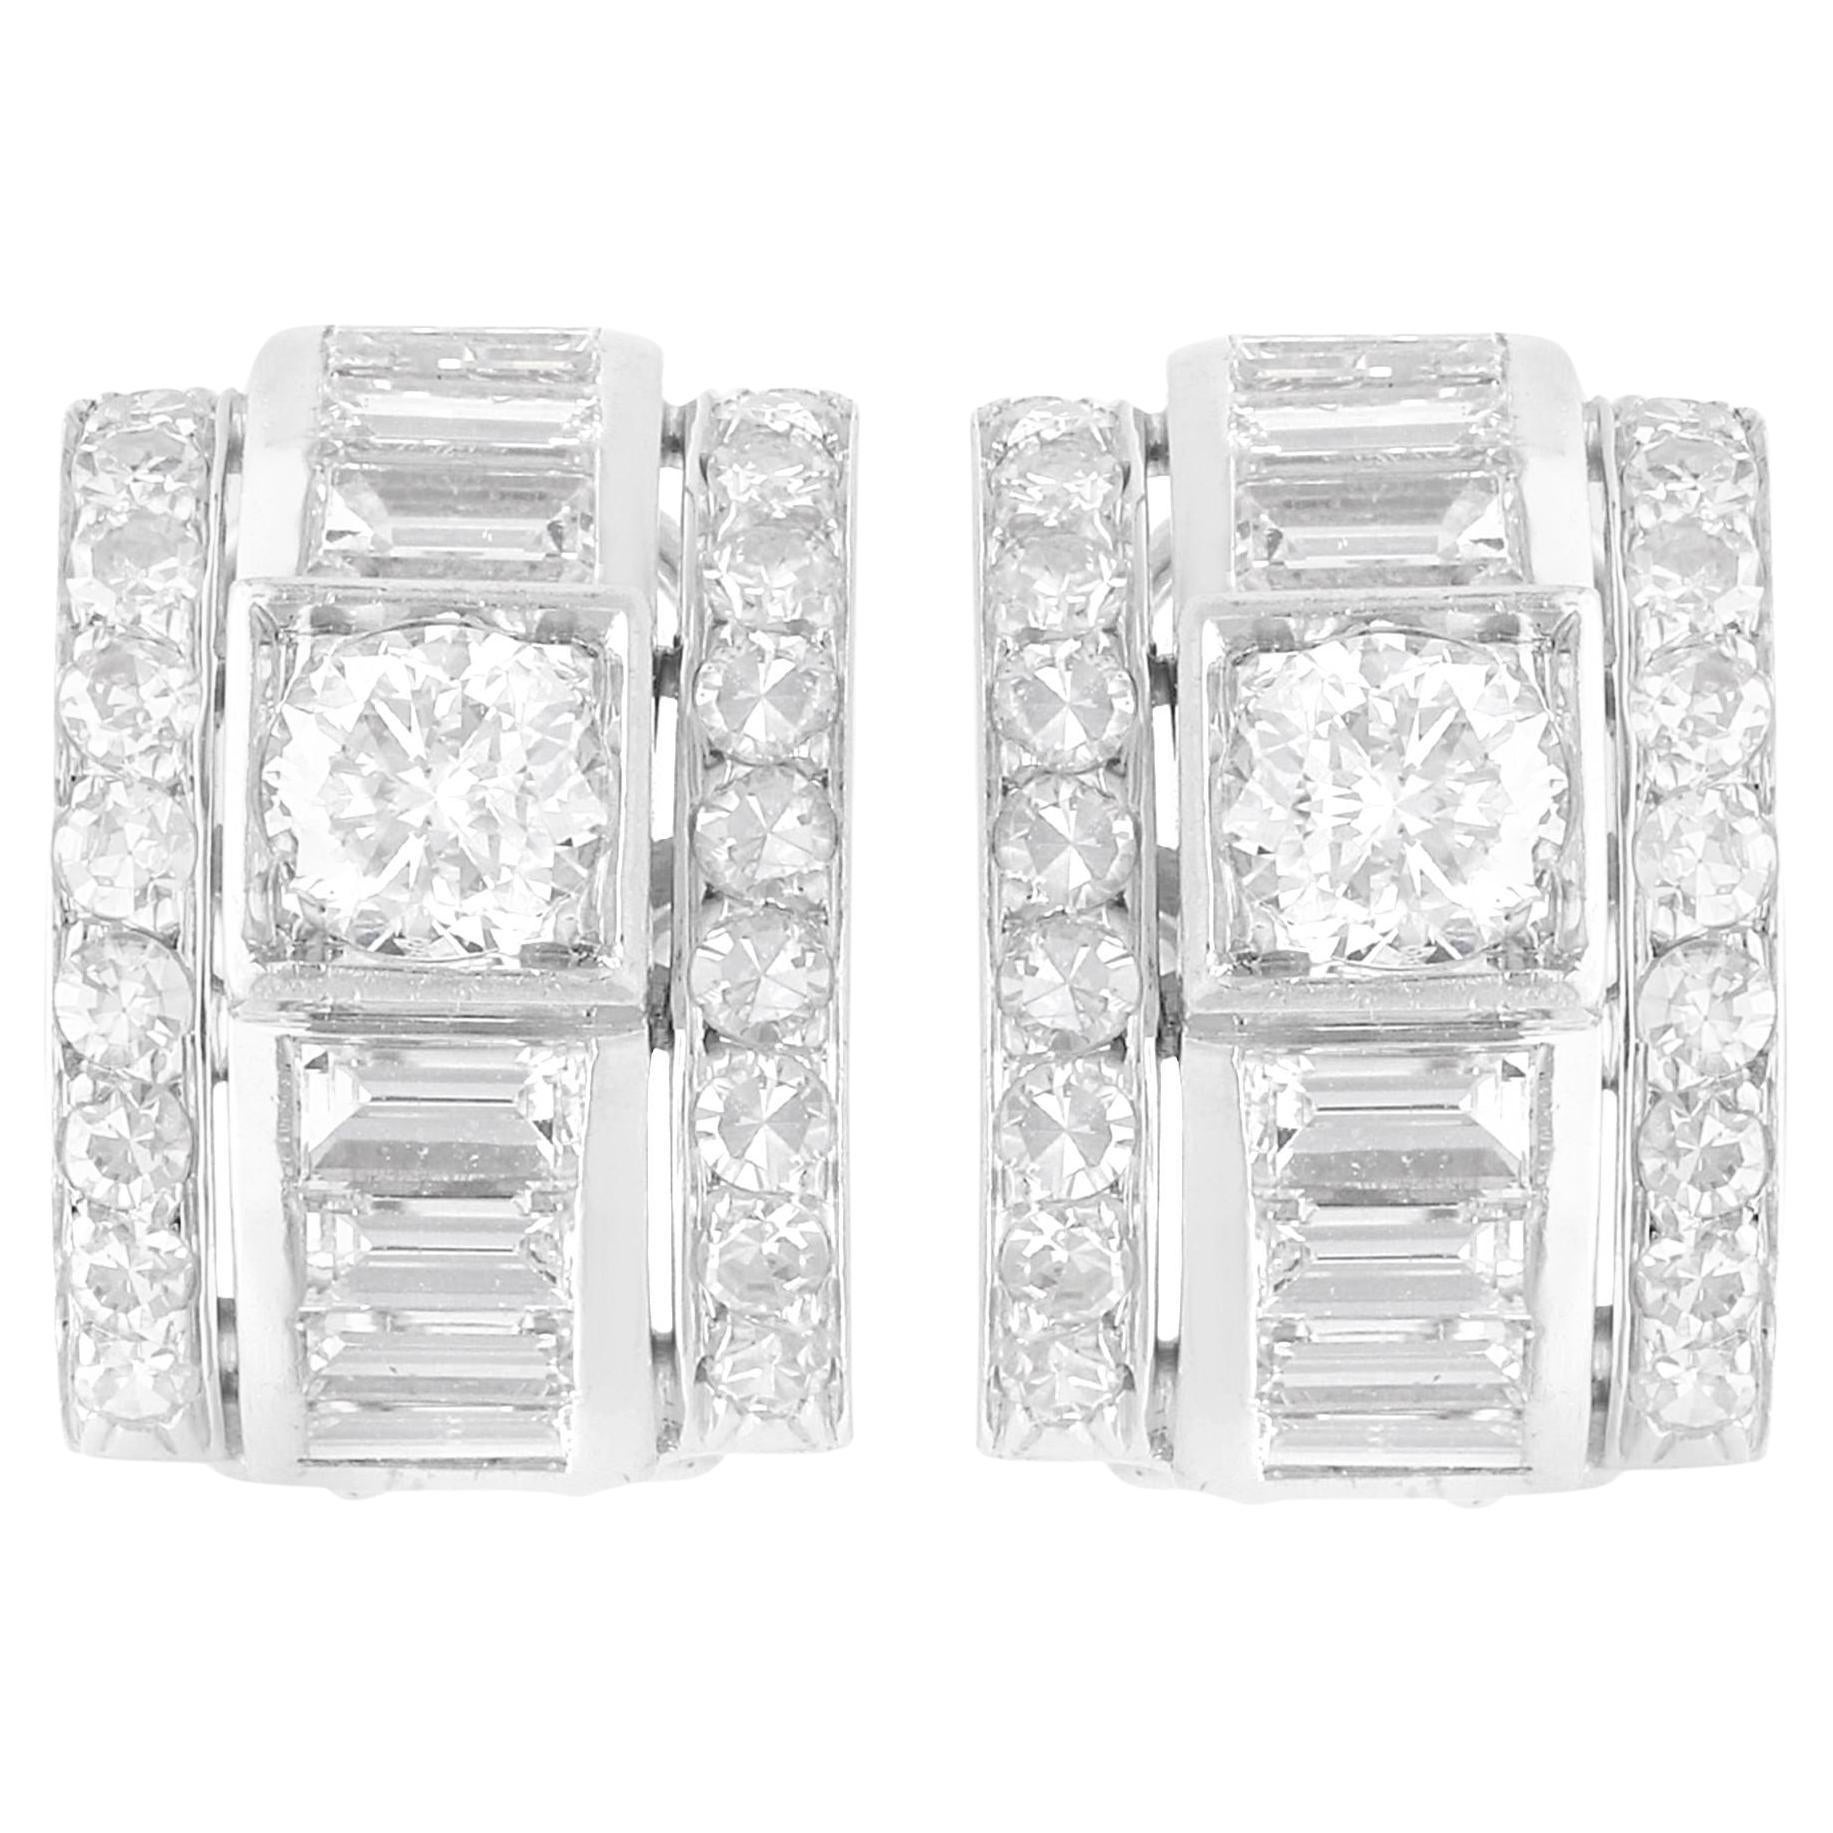 Antique French 2.87 Carat Diamond and White Gold Earrings, Circa 1935